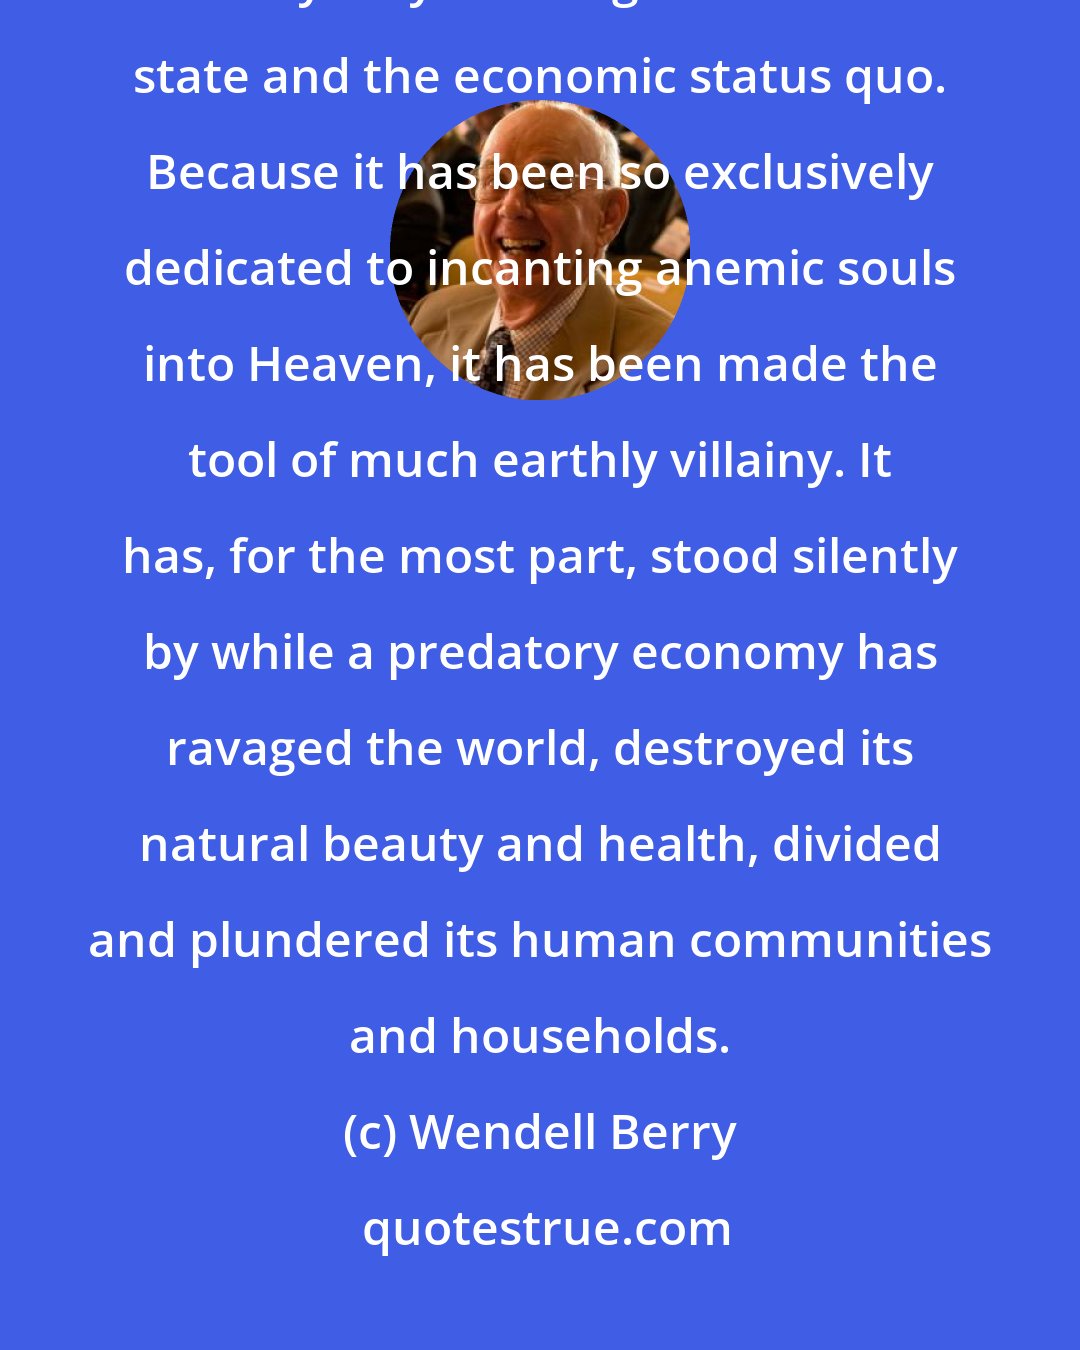 Wendell Berry: Despite its protests to the contrary, modern Christianity has become willy-nilly the religion of the state and the economic status quo. Because it has been so exclusively dedicated to incanting anemic souls into Heaven, it has been made the tool of much earthly villainy. It has, for the most part, stood silently by while a predatory economy has ravaged the world, destroyed its natural beauty and health, divided and plundered its human communities and households.